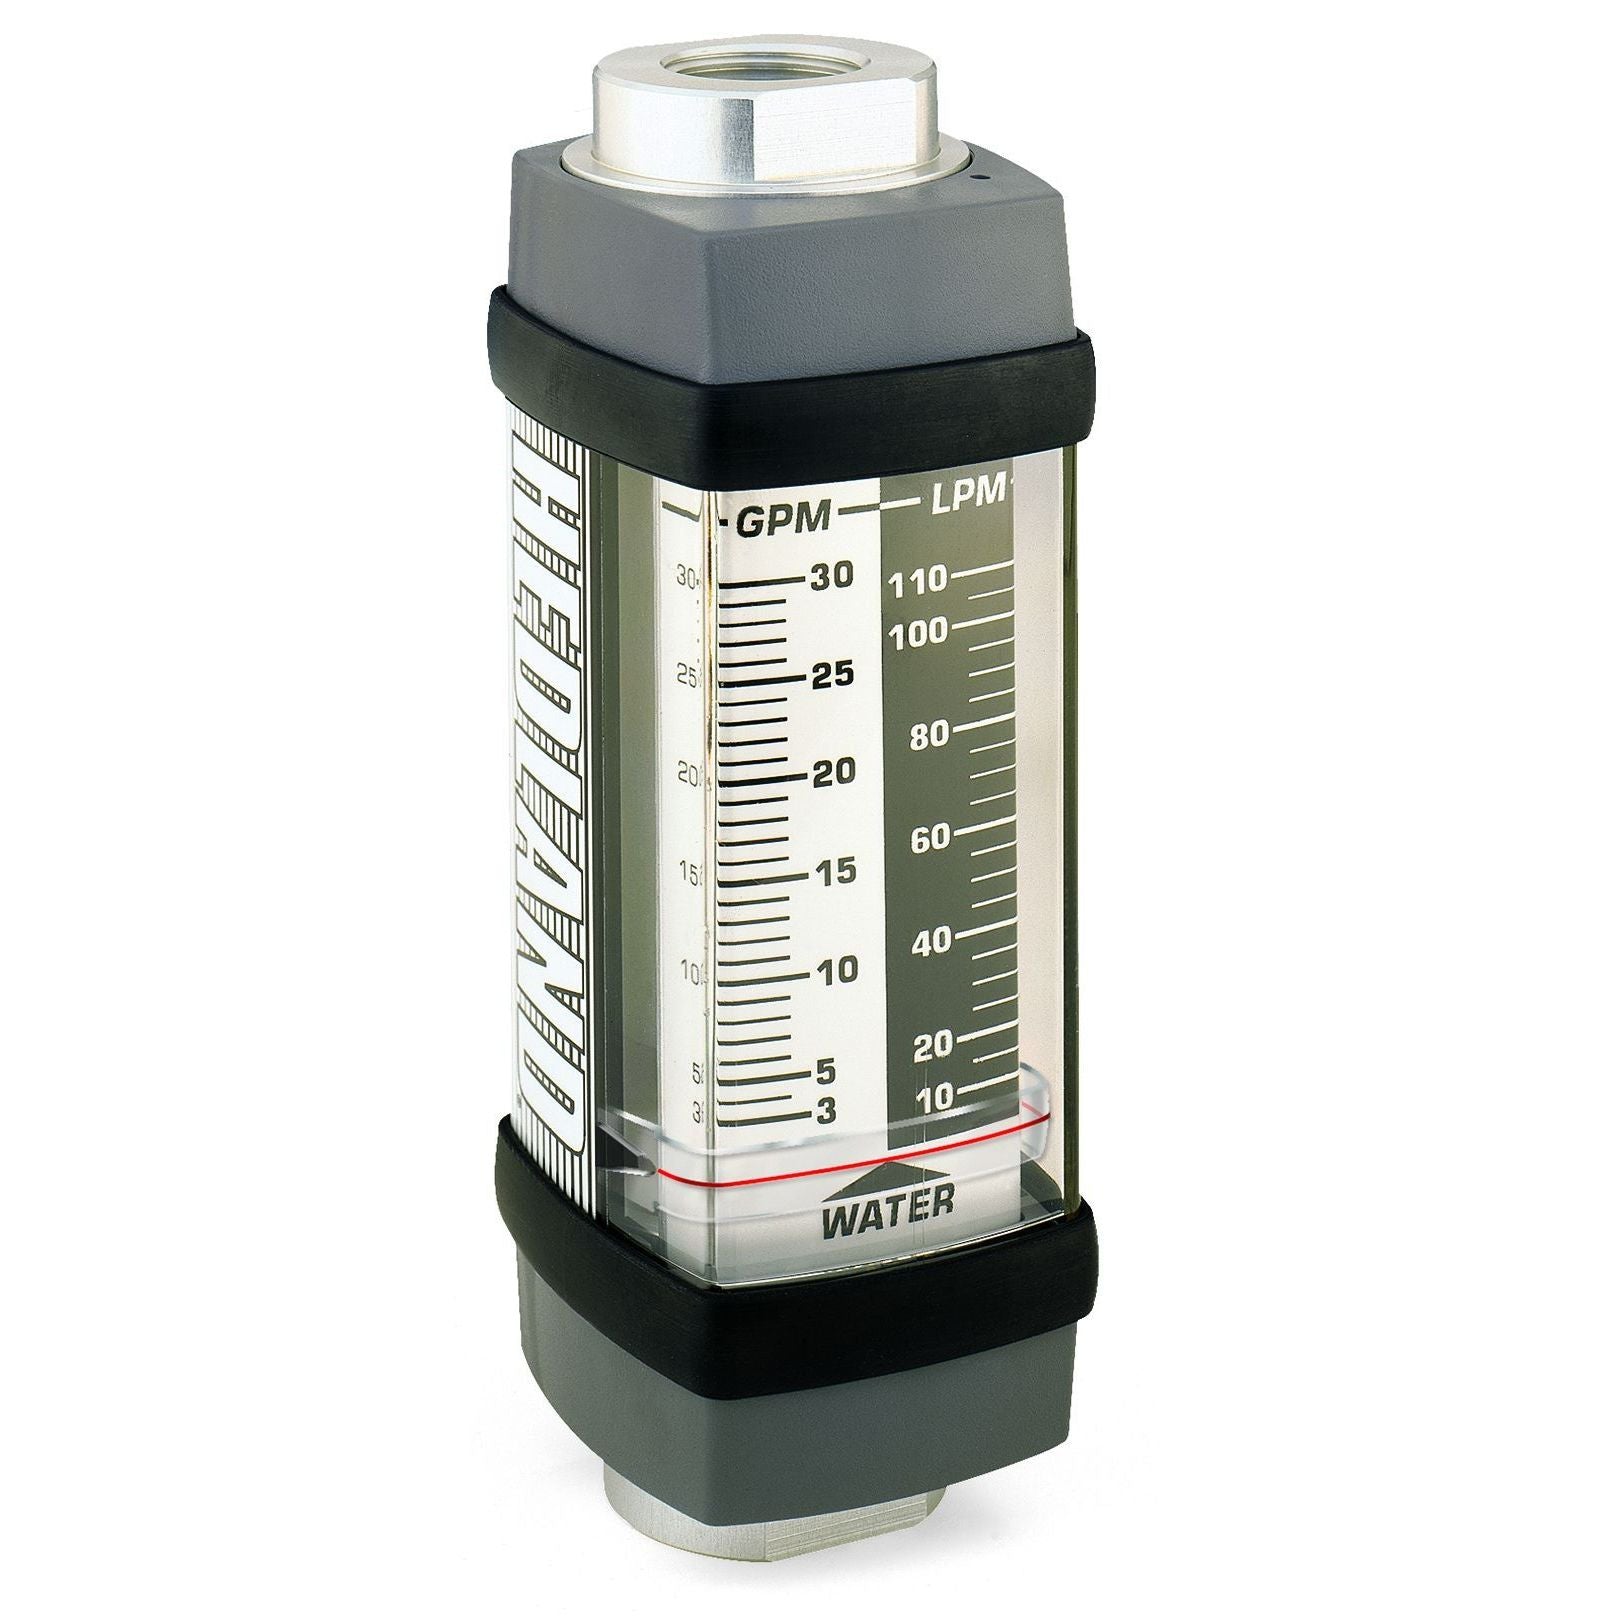 H841X-100 : Hedland 5000psi 316SS Flow Meter for Caustic or Corrosive Liquids, 1 NPT, 10 to 100 GPM